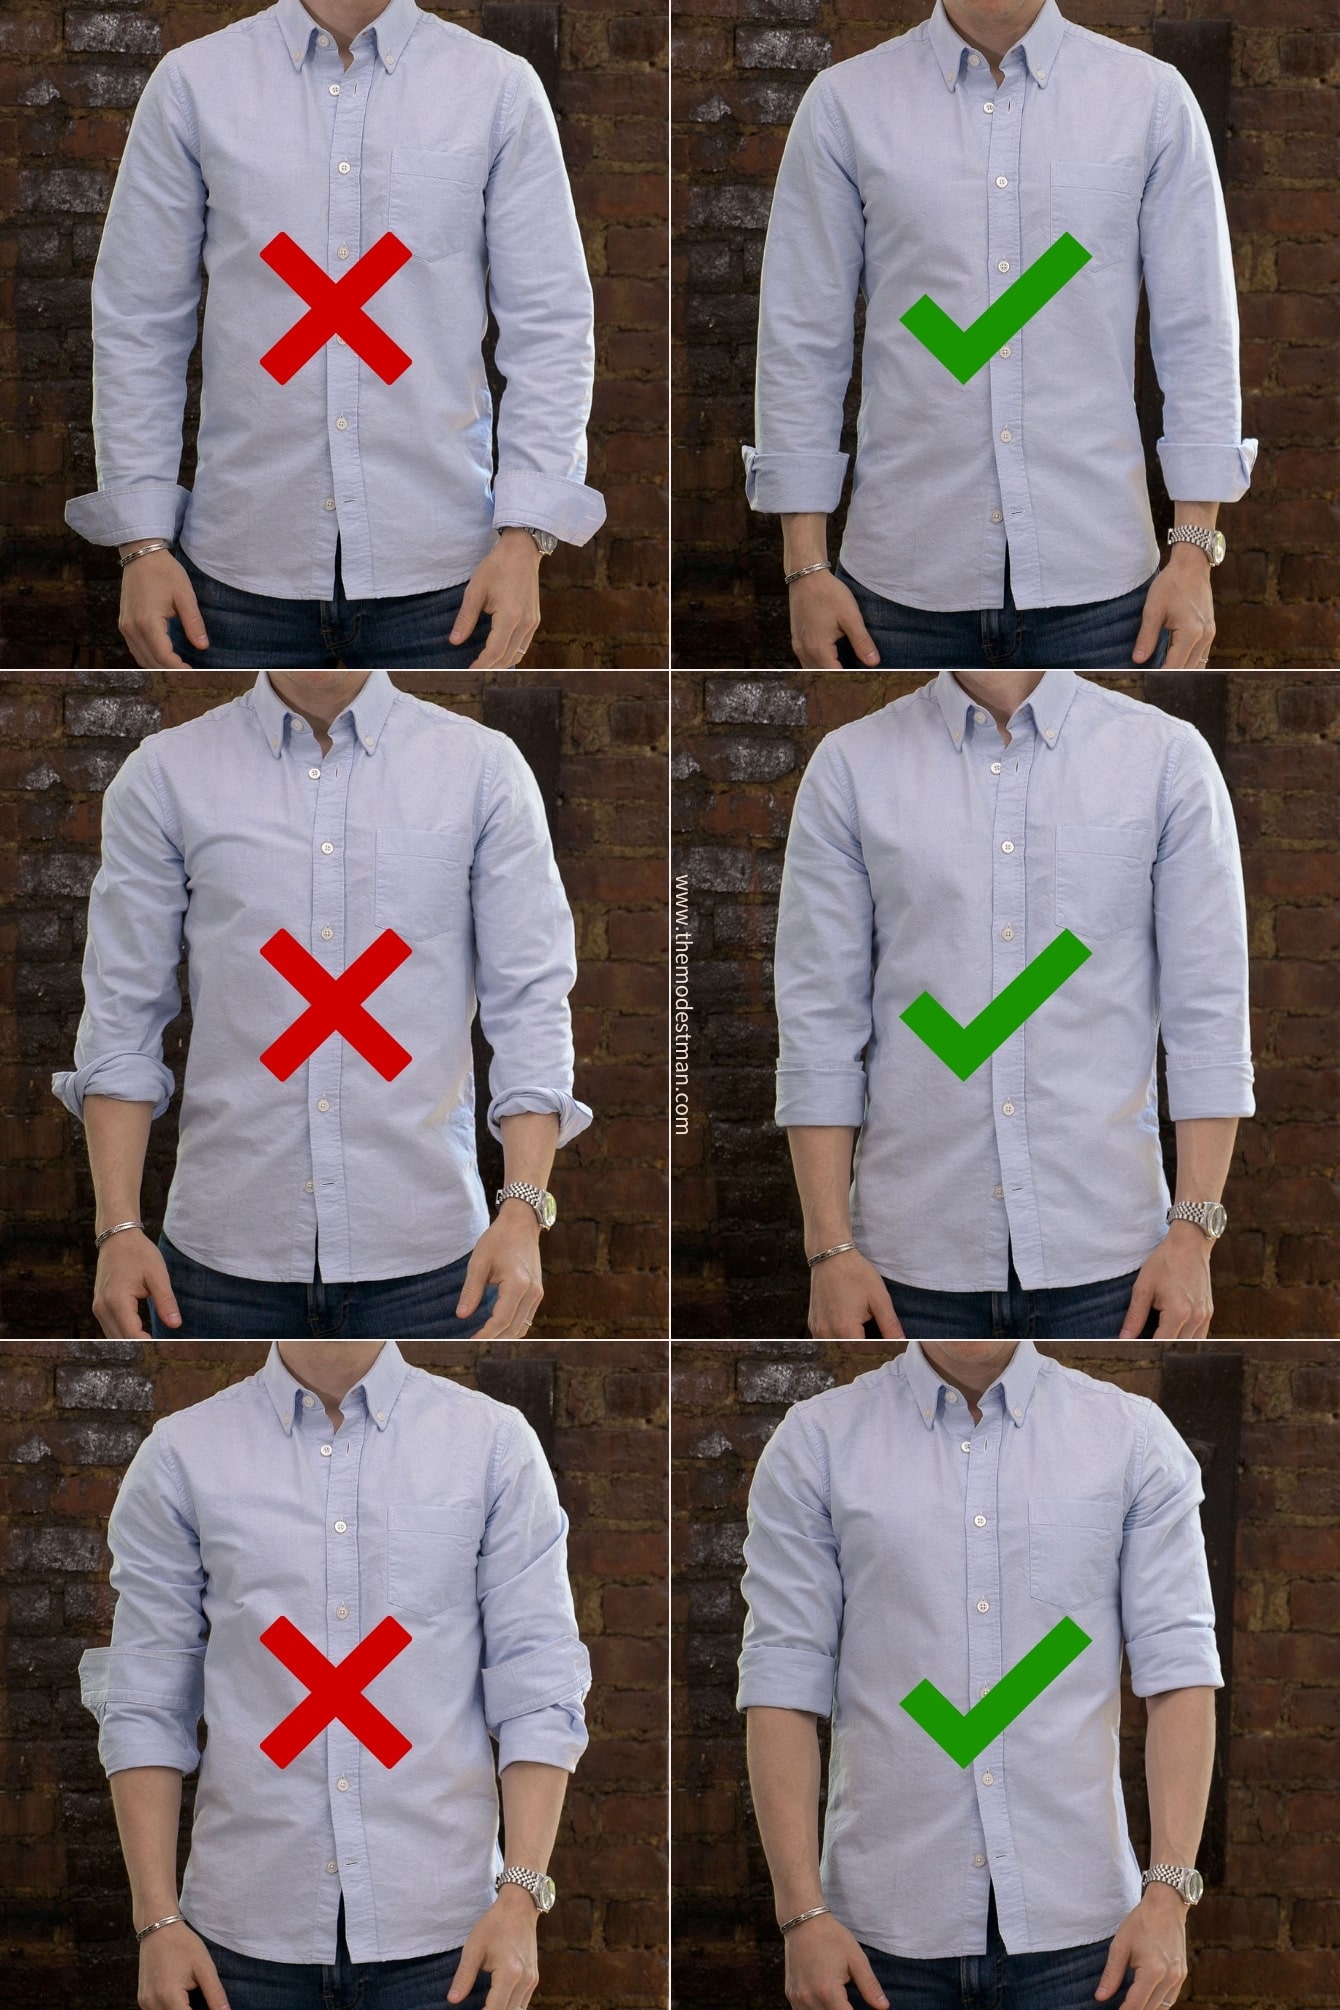 How to Roll Up Your Sleeves the Right Way - The GentleManual